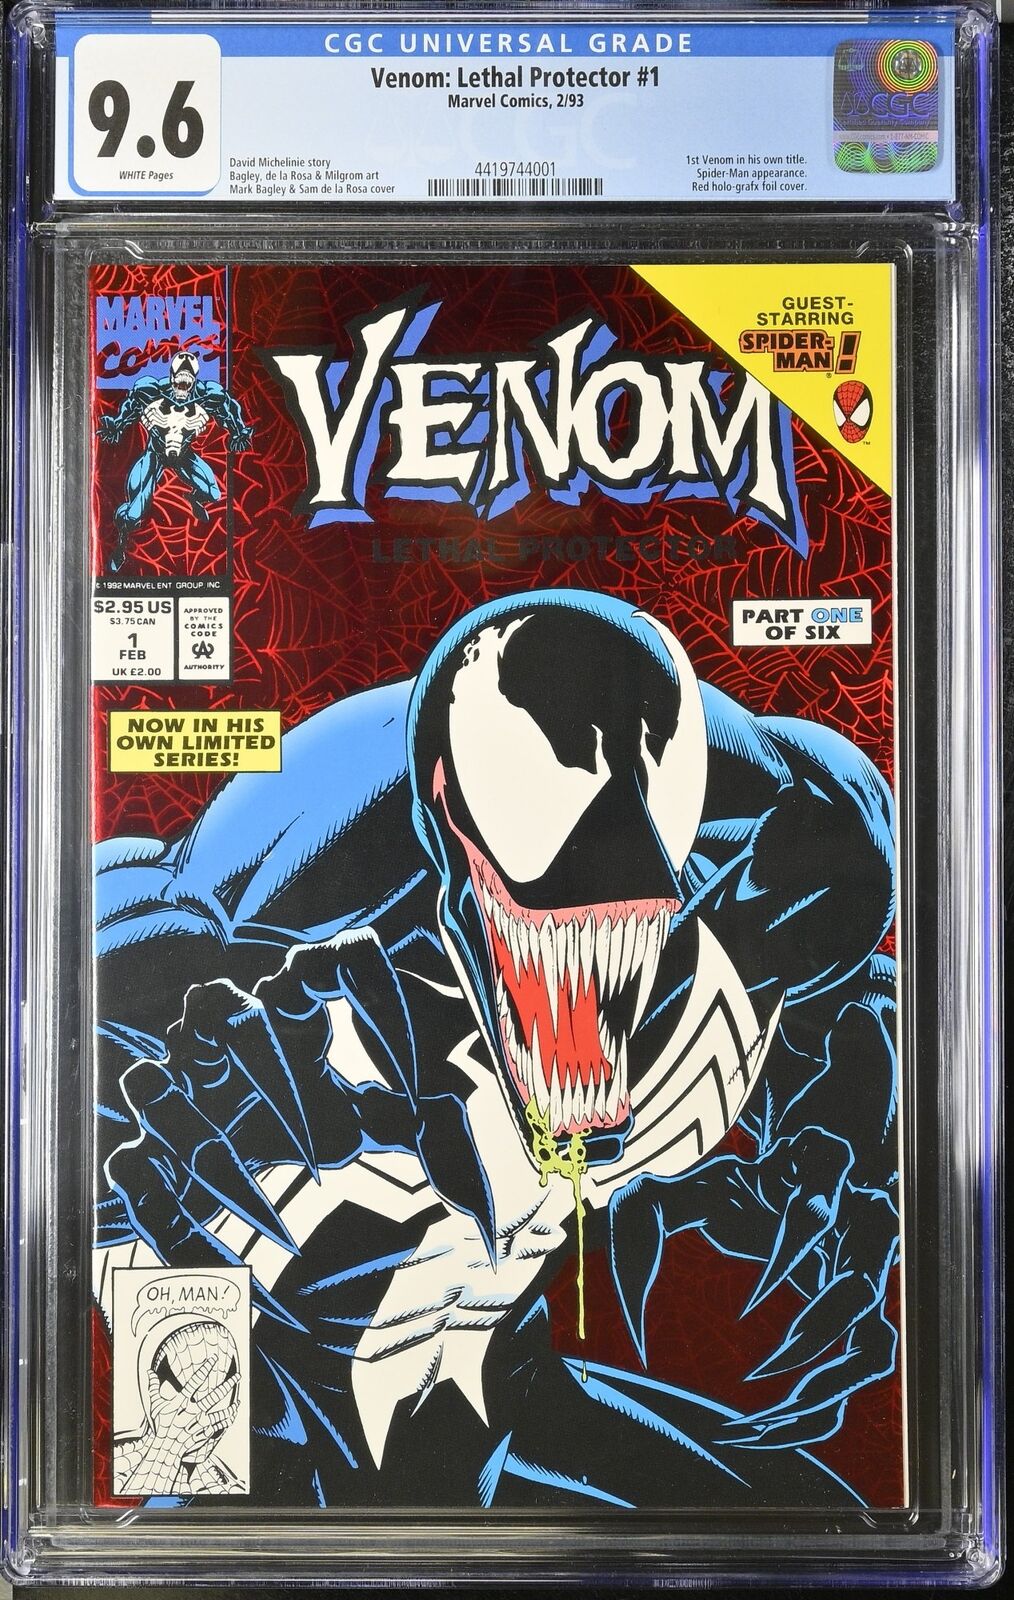 Venom: Lethal Protector (1993) #1 CGC NM+ 9.6 White Pages Red Foil Variant